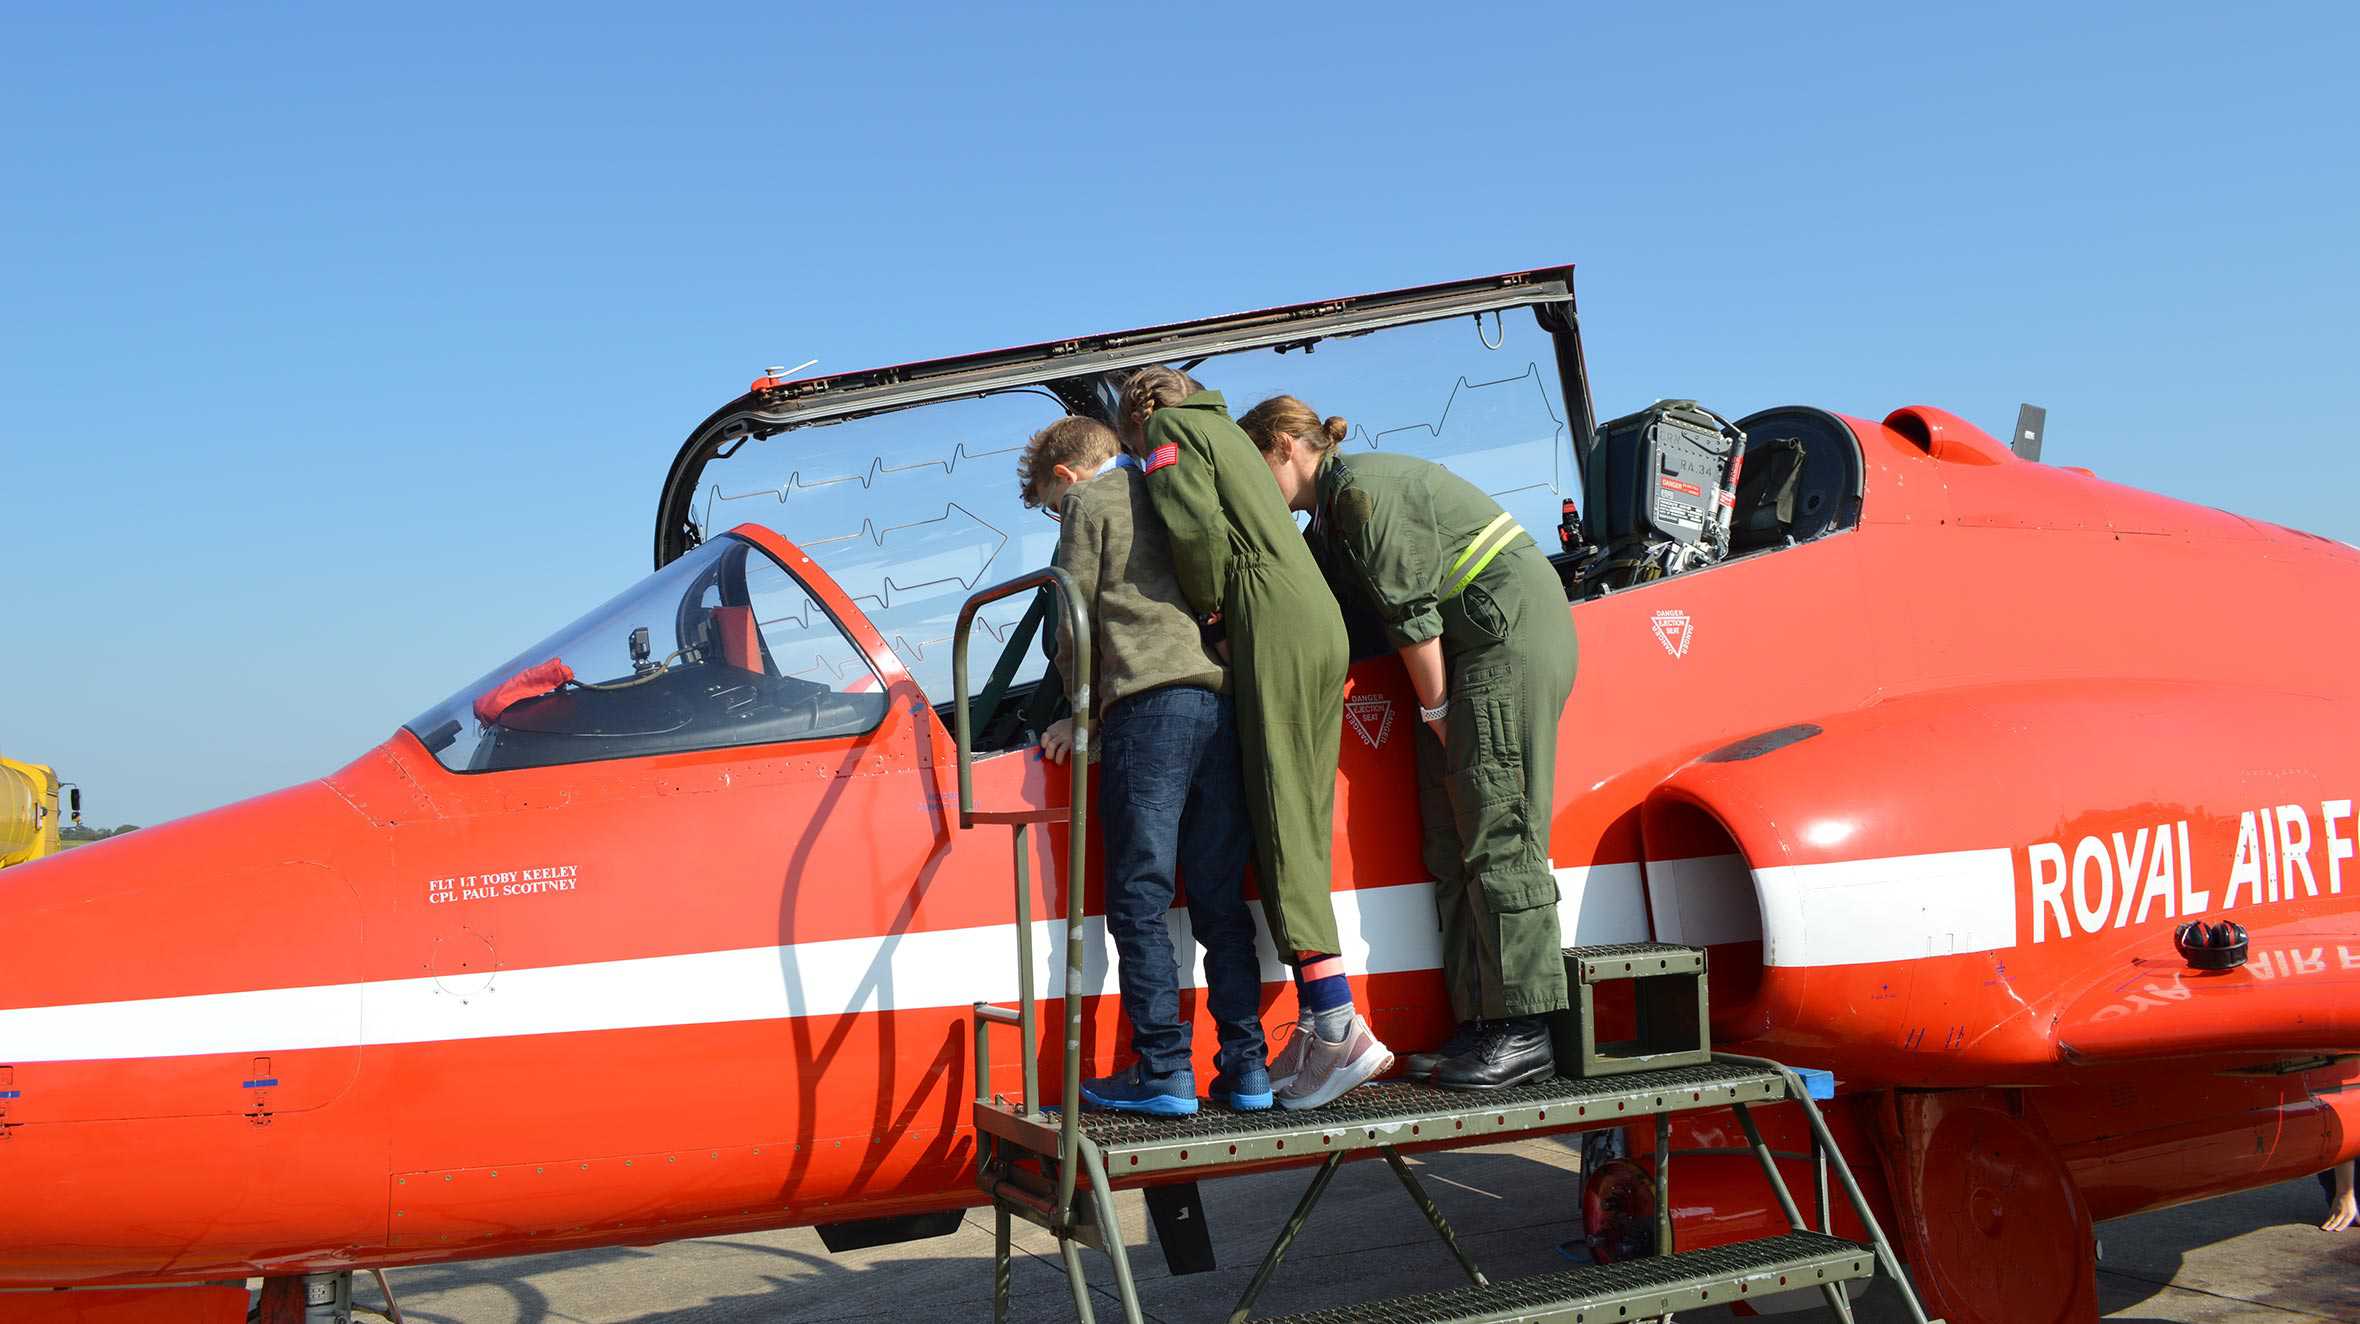 John and his sister being shown the cockpit by an RAF pilot.